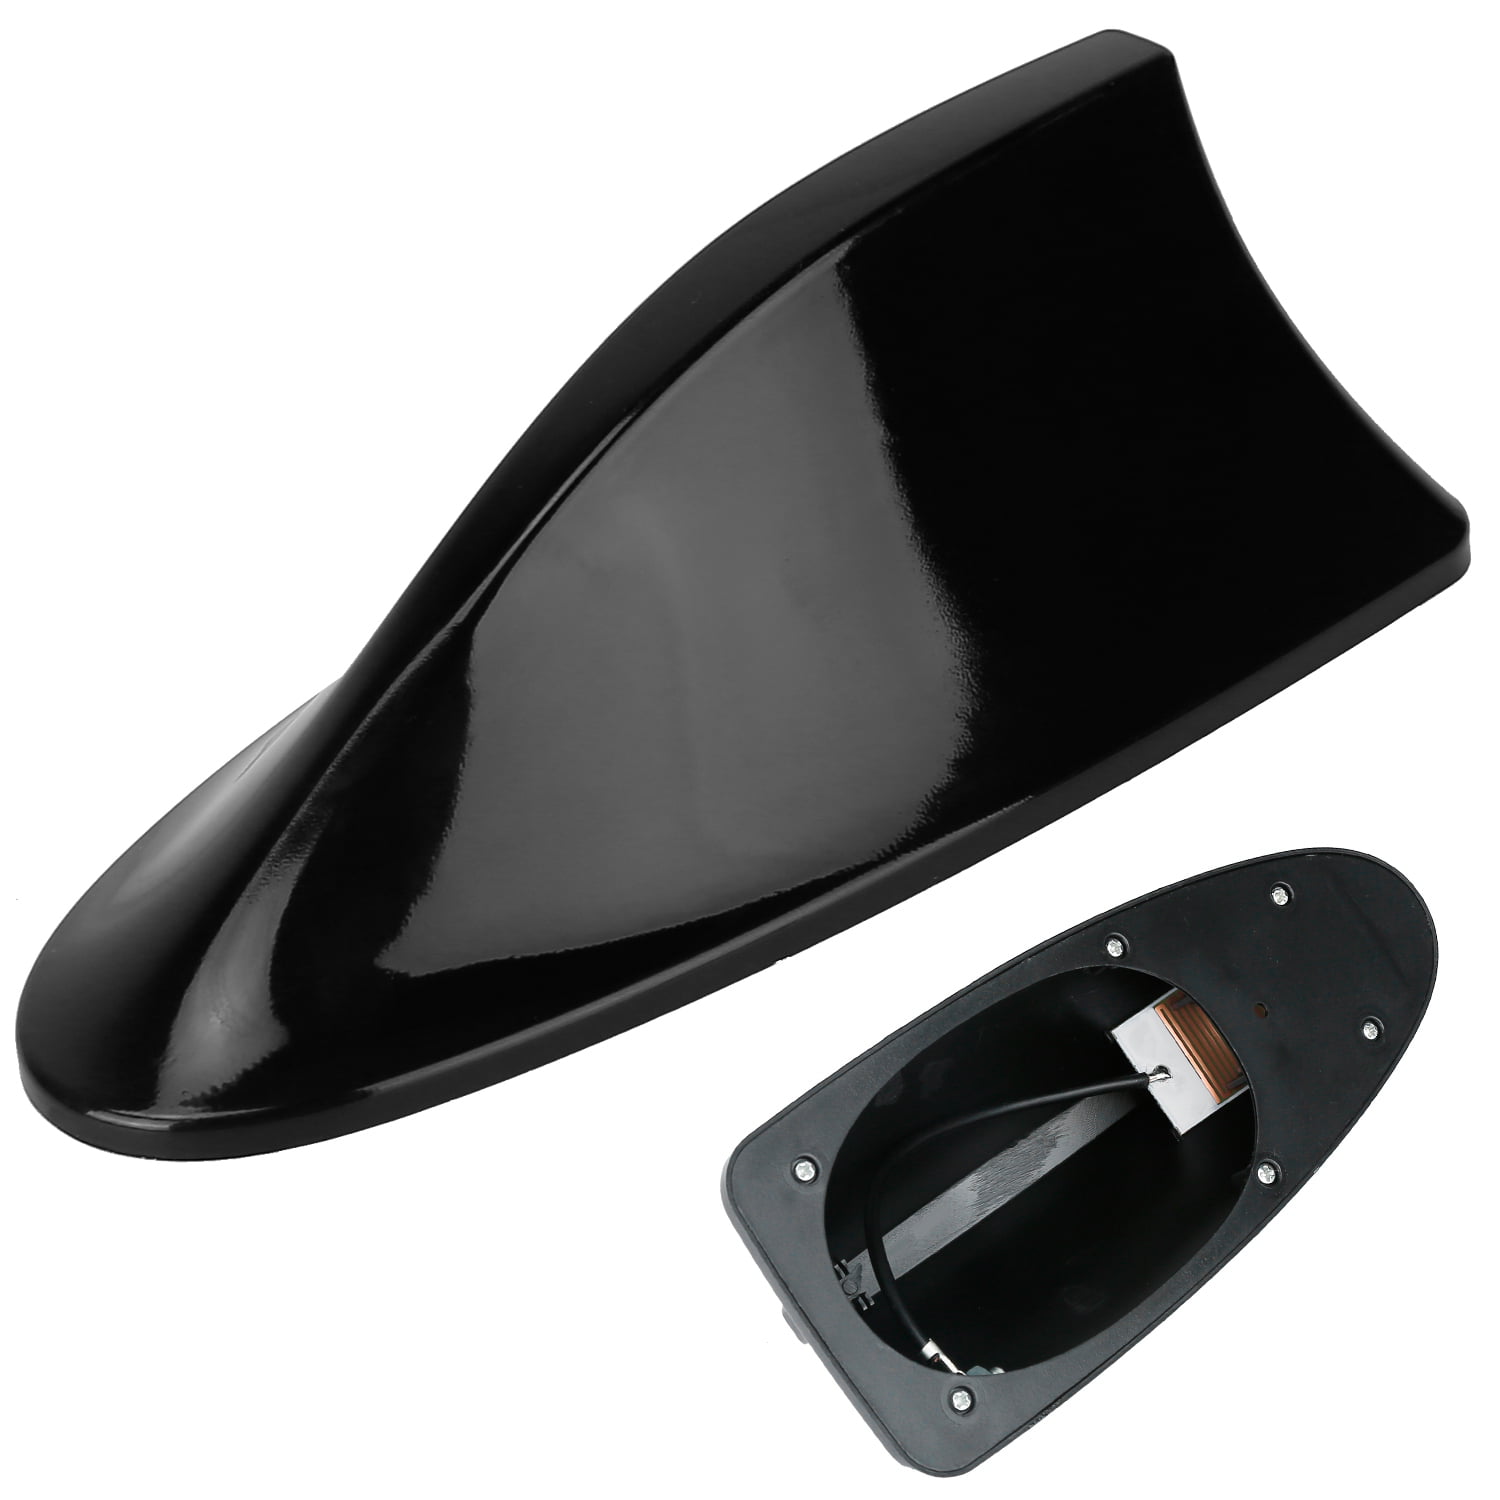 YOUR SKIN Car Shark Fin Antenna Cover AM FM Radio Signal Roof Adhesive Base Fits Most Auto Cars 